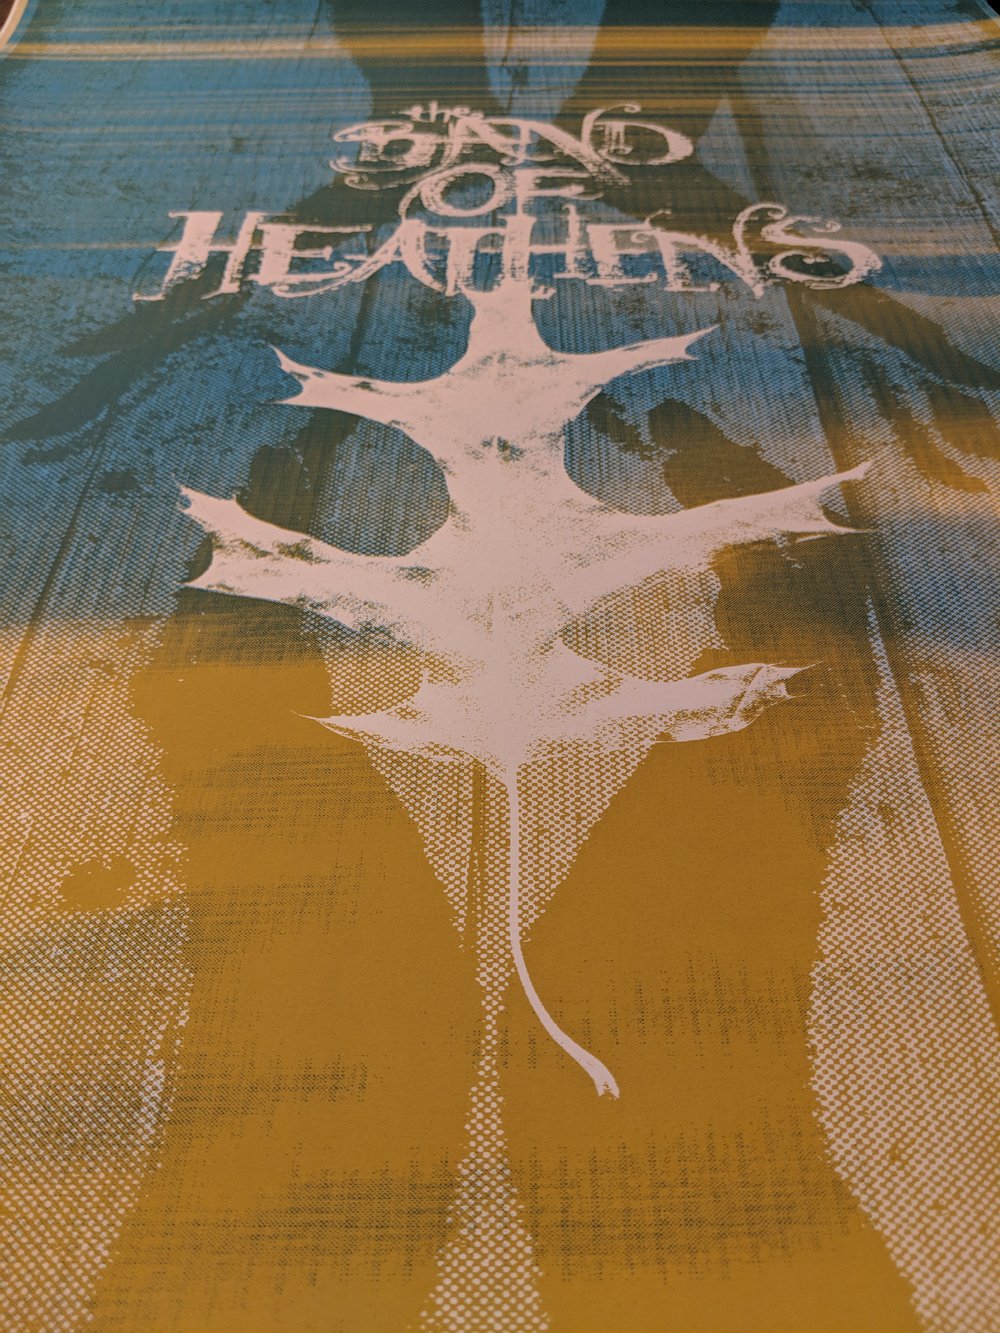 Band of Heathens Poster